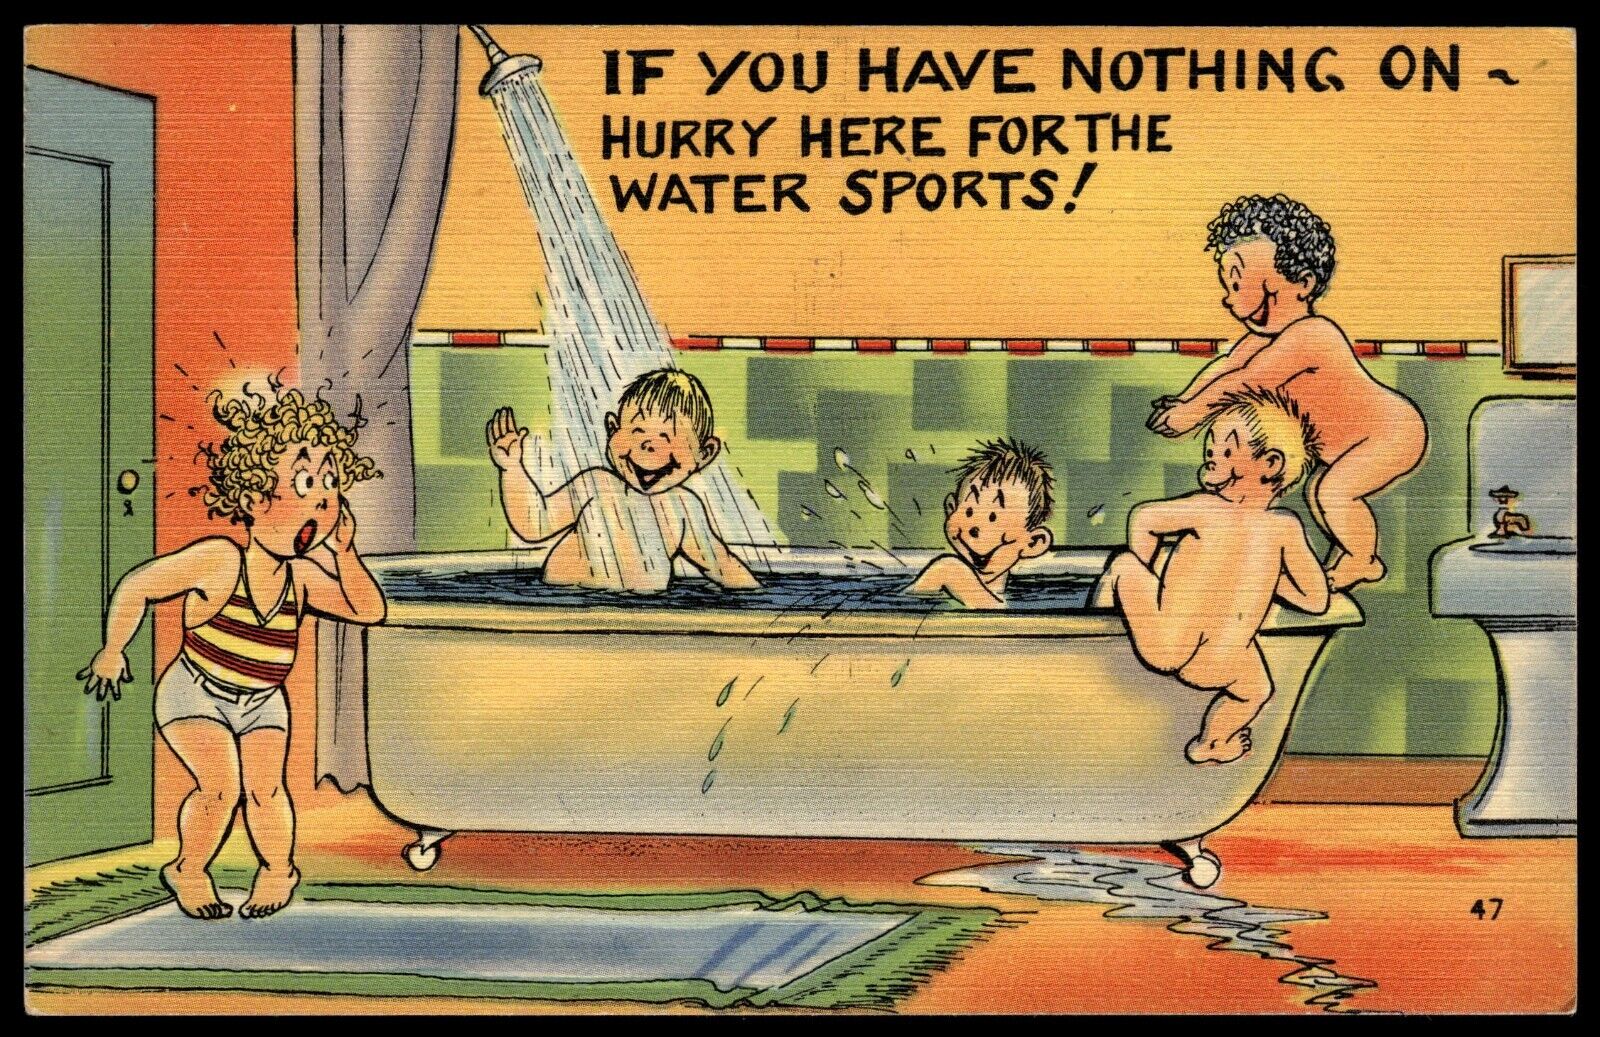 Postcard Linen Humor If you have nothing on hurry here for the water sports